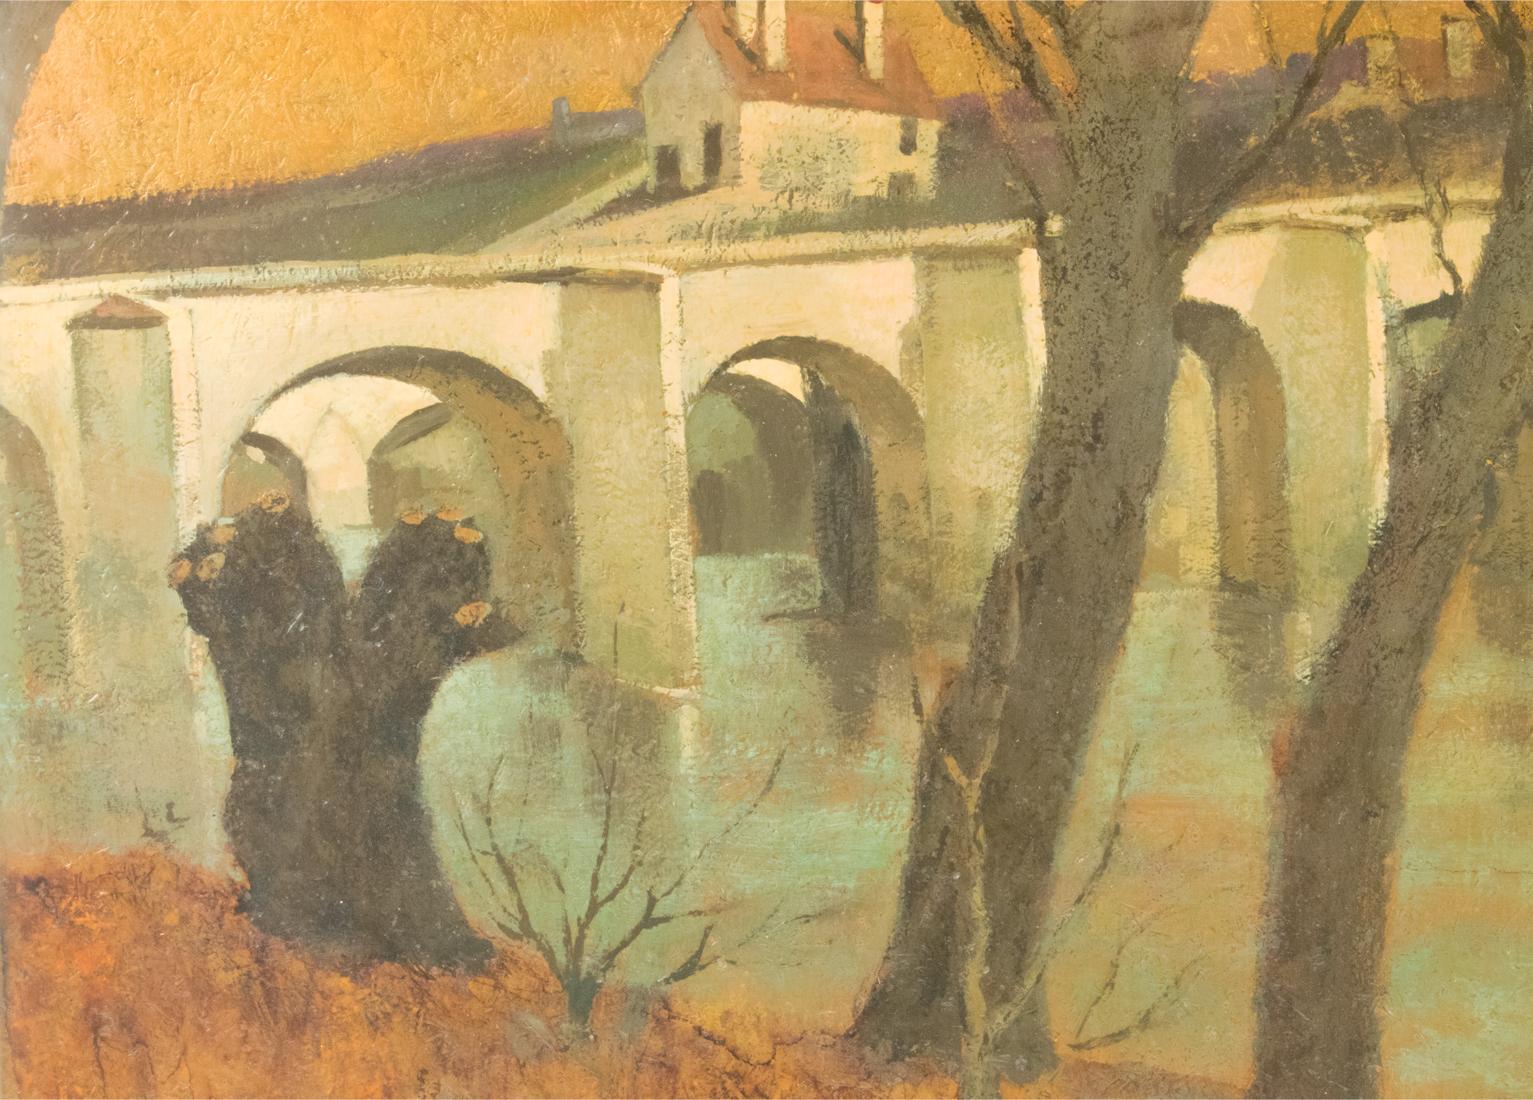 Vaulted Bridge in French Landscape Oil on Wood Painting by Vincent Mazzocchini For Sale 7